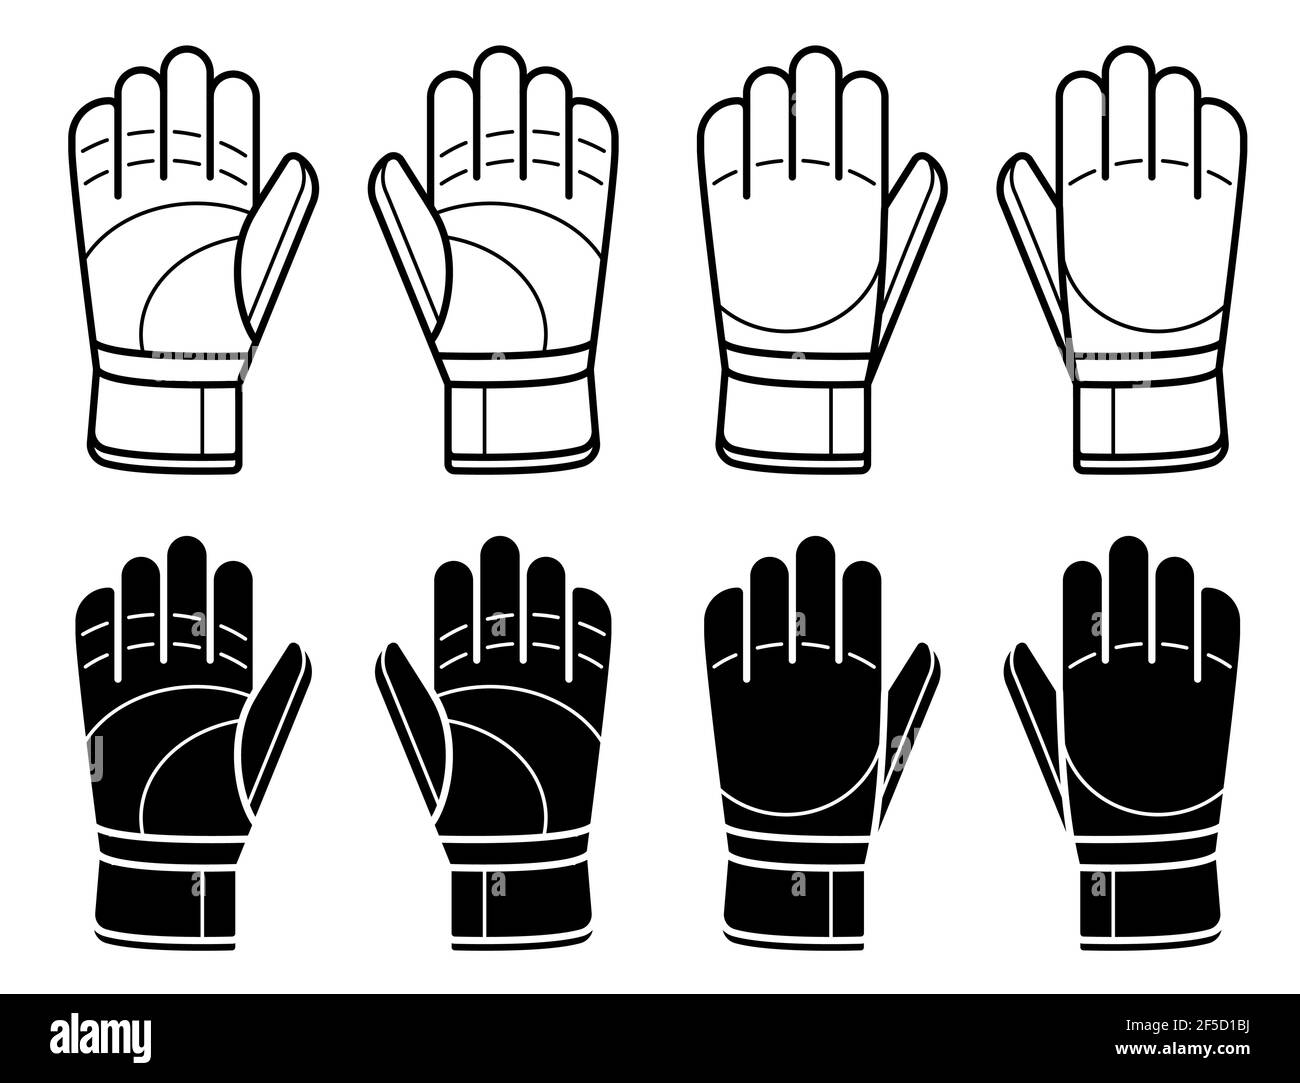 pair of goalkeeper gloves for playing classic football. Soccer goalie protective gear. Isolated vector on white background Stock Vector